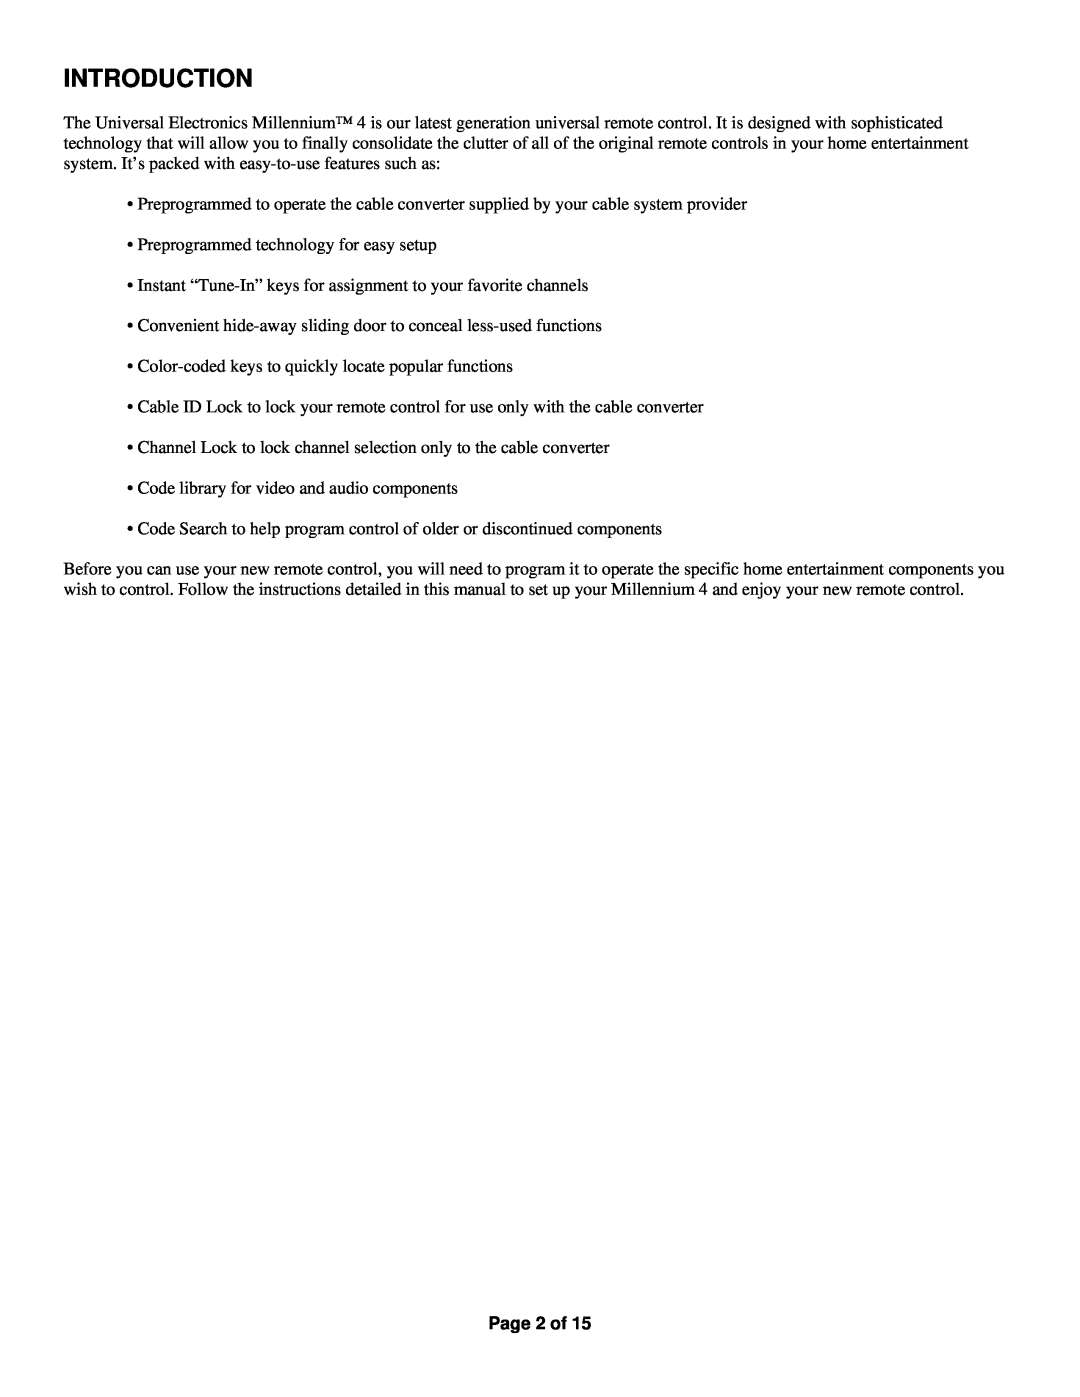 Universal Electronics Millennium 4 manual Introduction, Page 2 of 